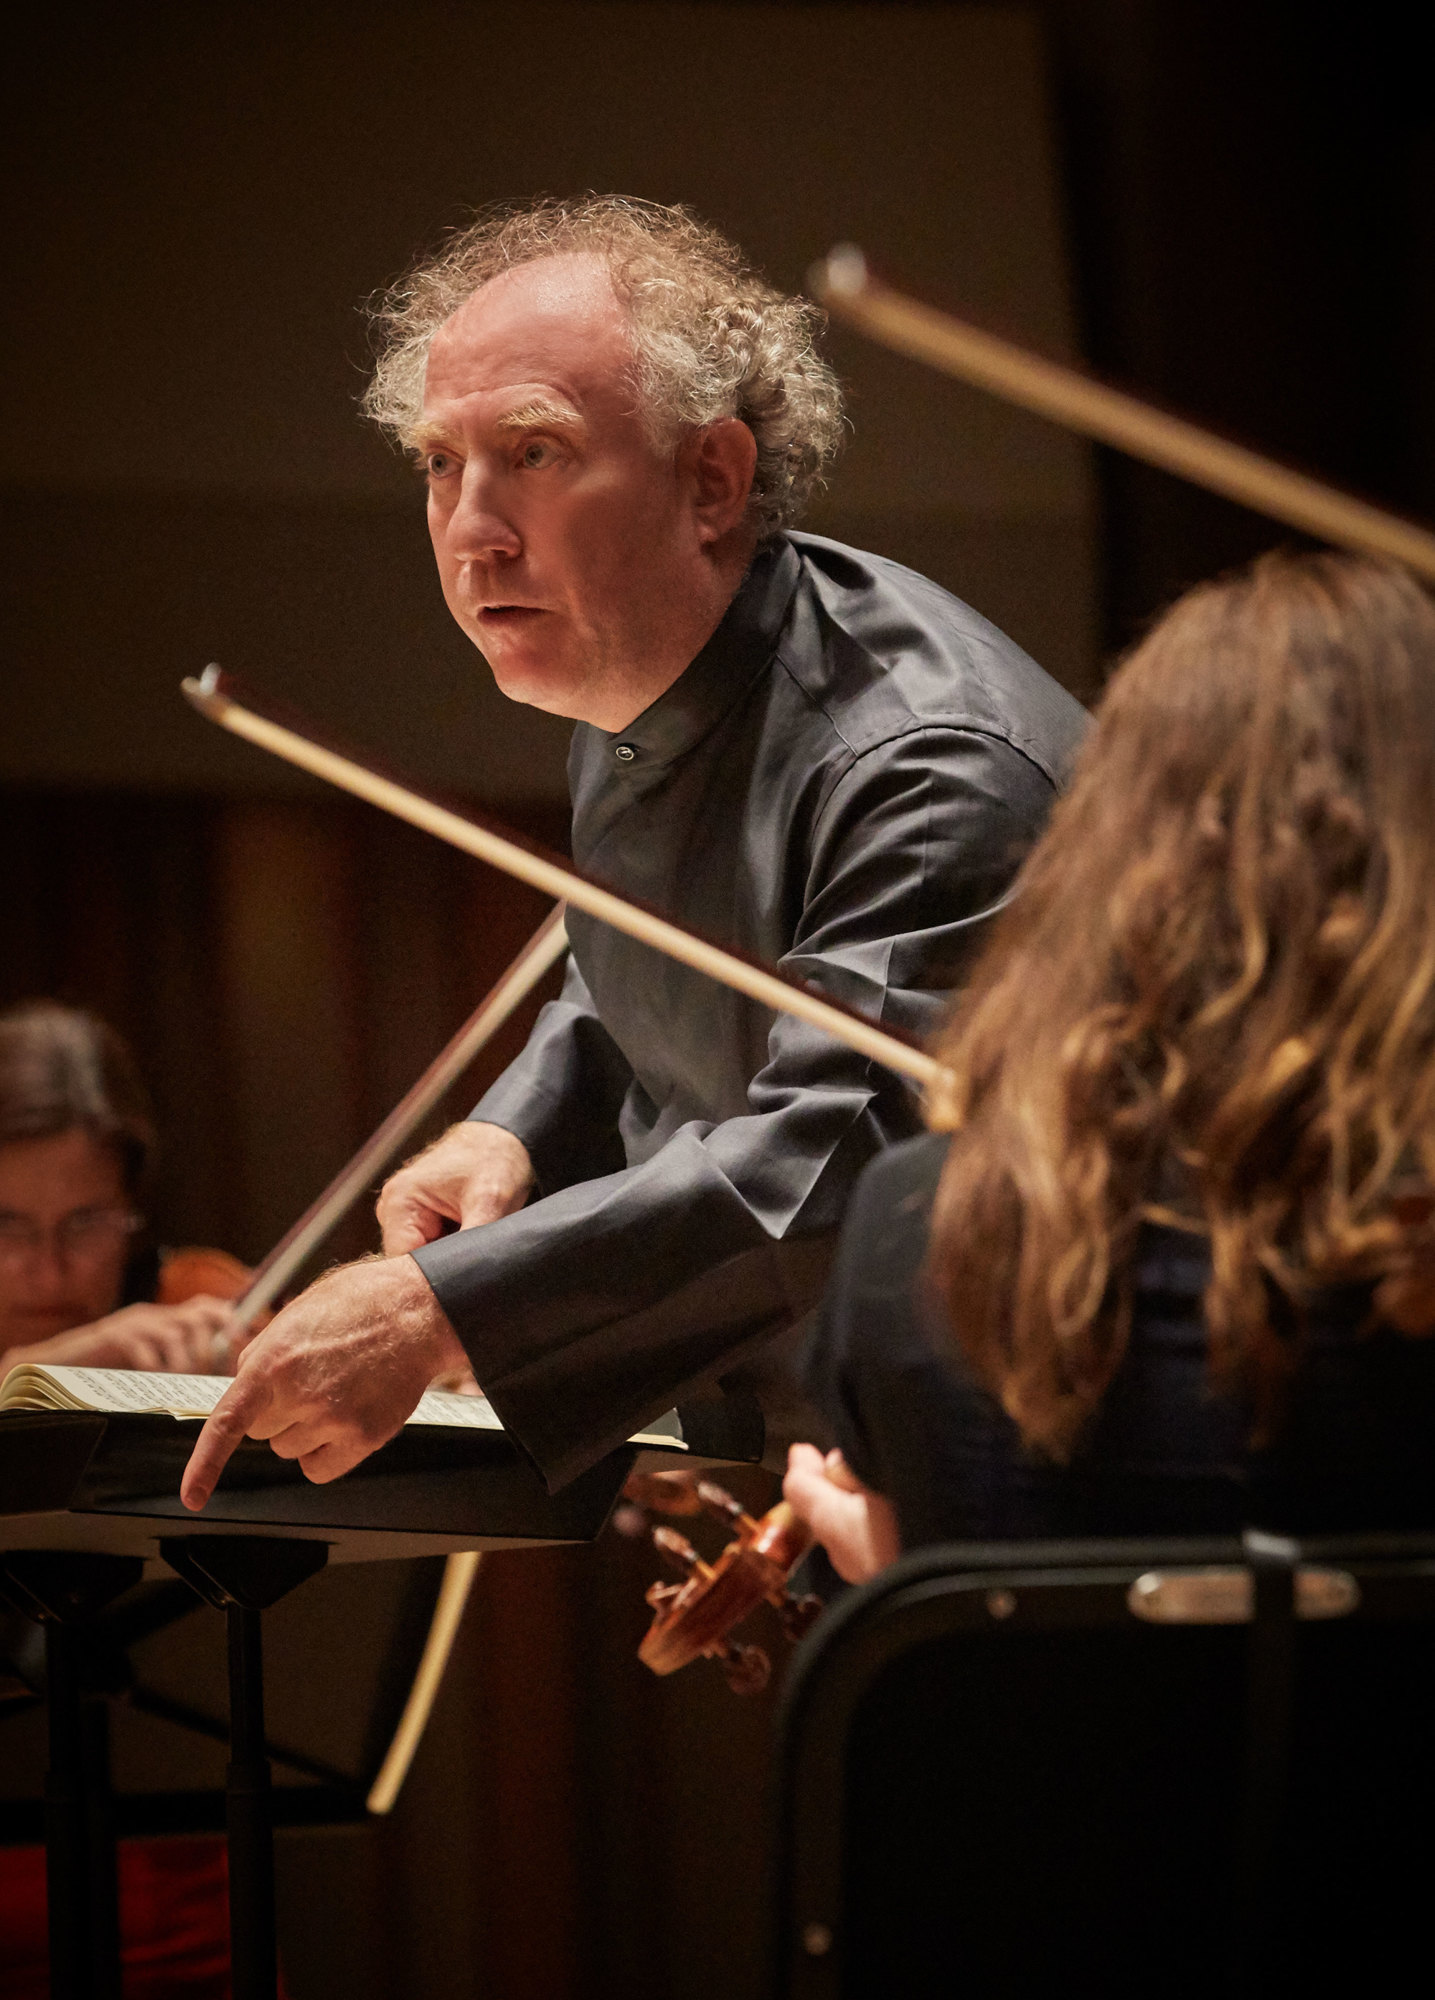 Music Director Jeffrey Kahane conducted the evening from the keyboard, changing from harpsichord to piano for Bach’s Keyboard Concerto in F Major with two obligato flutes. Courtesy photo